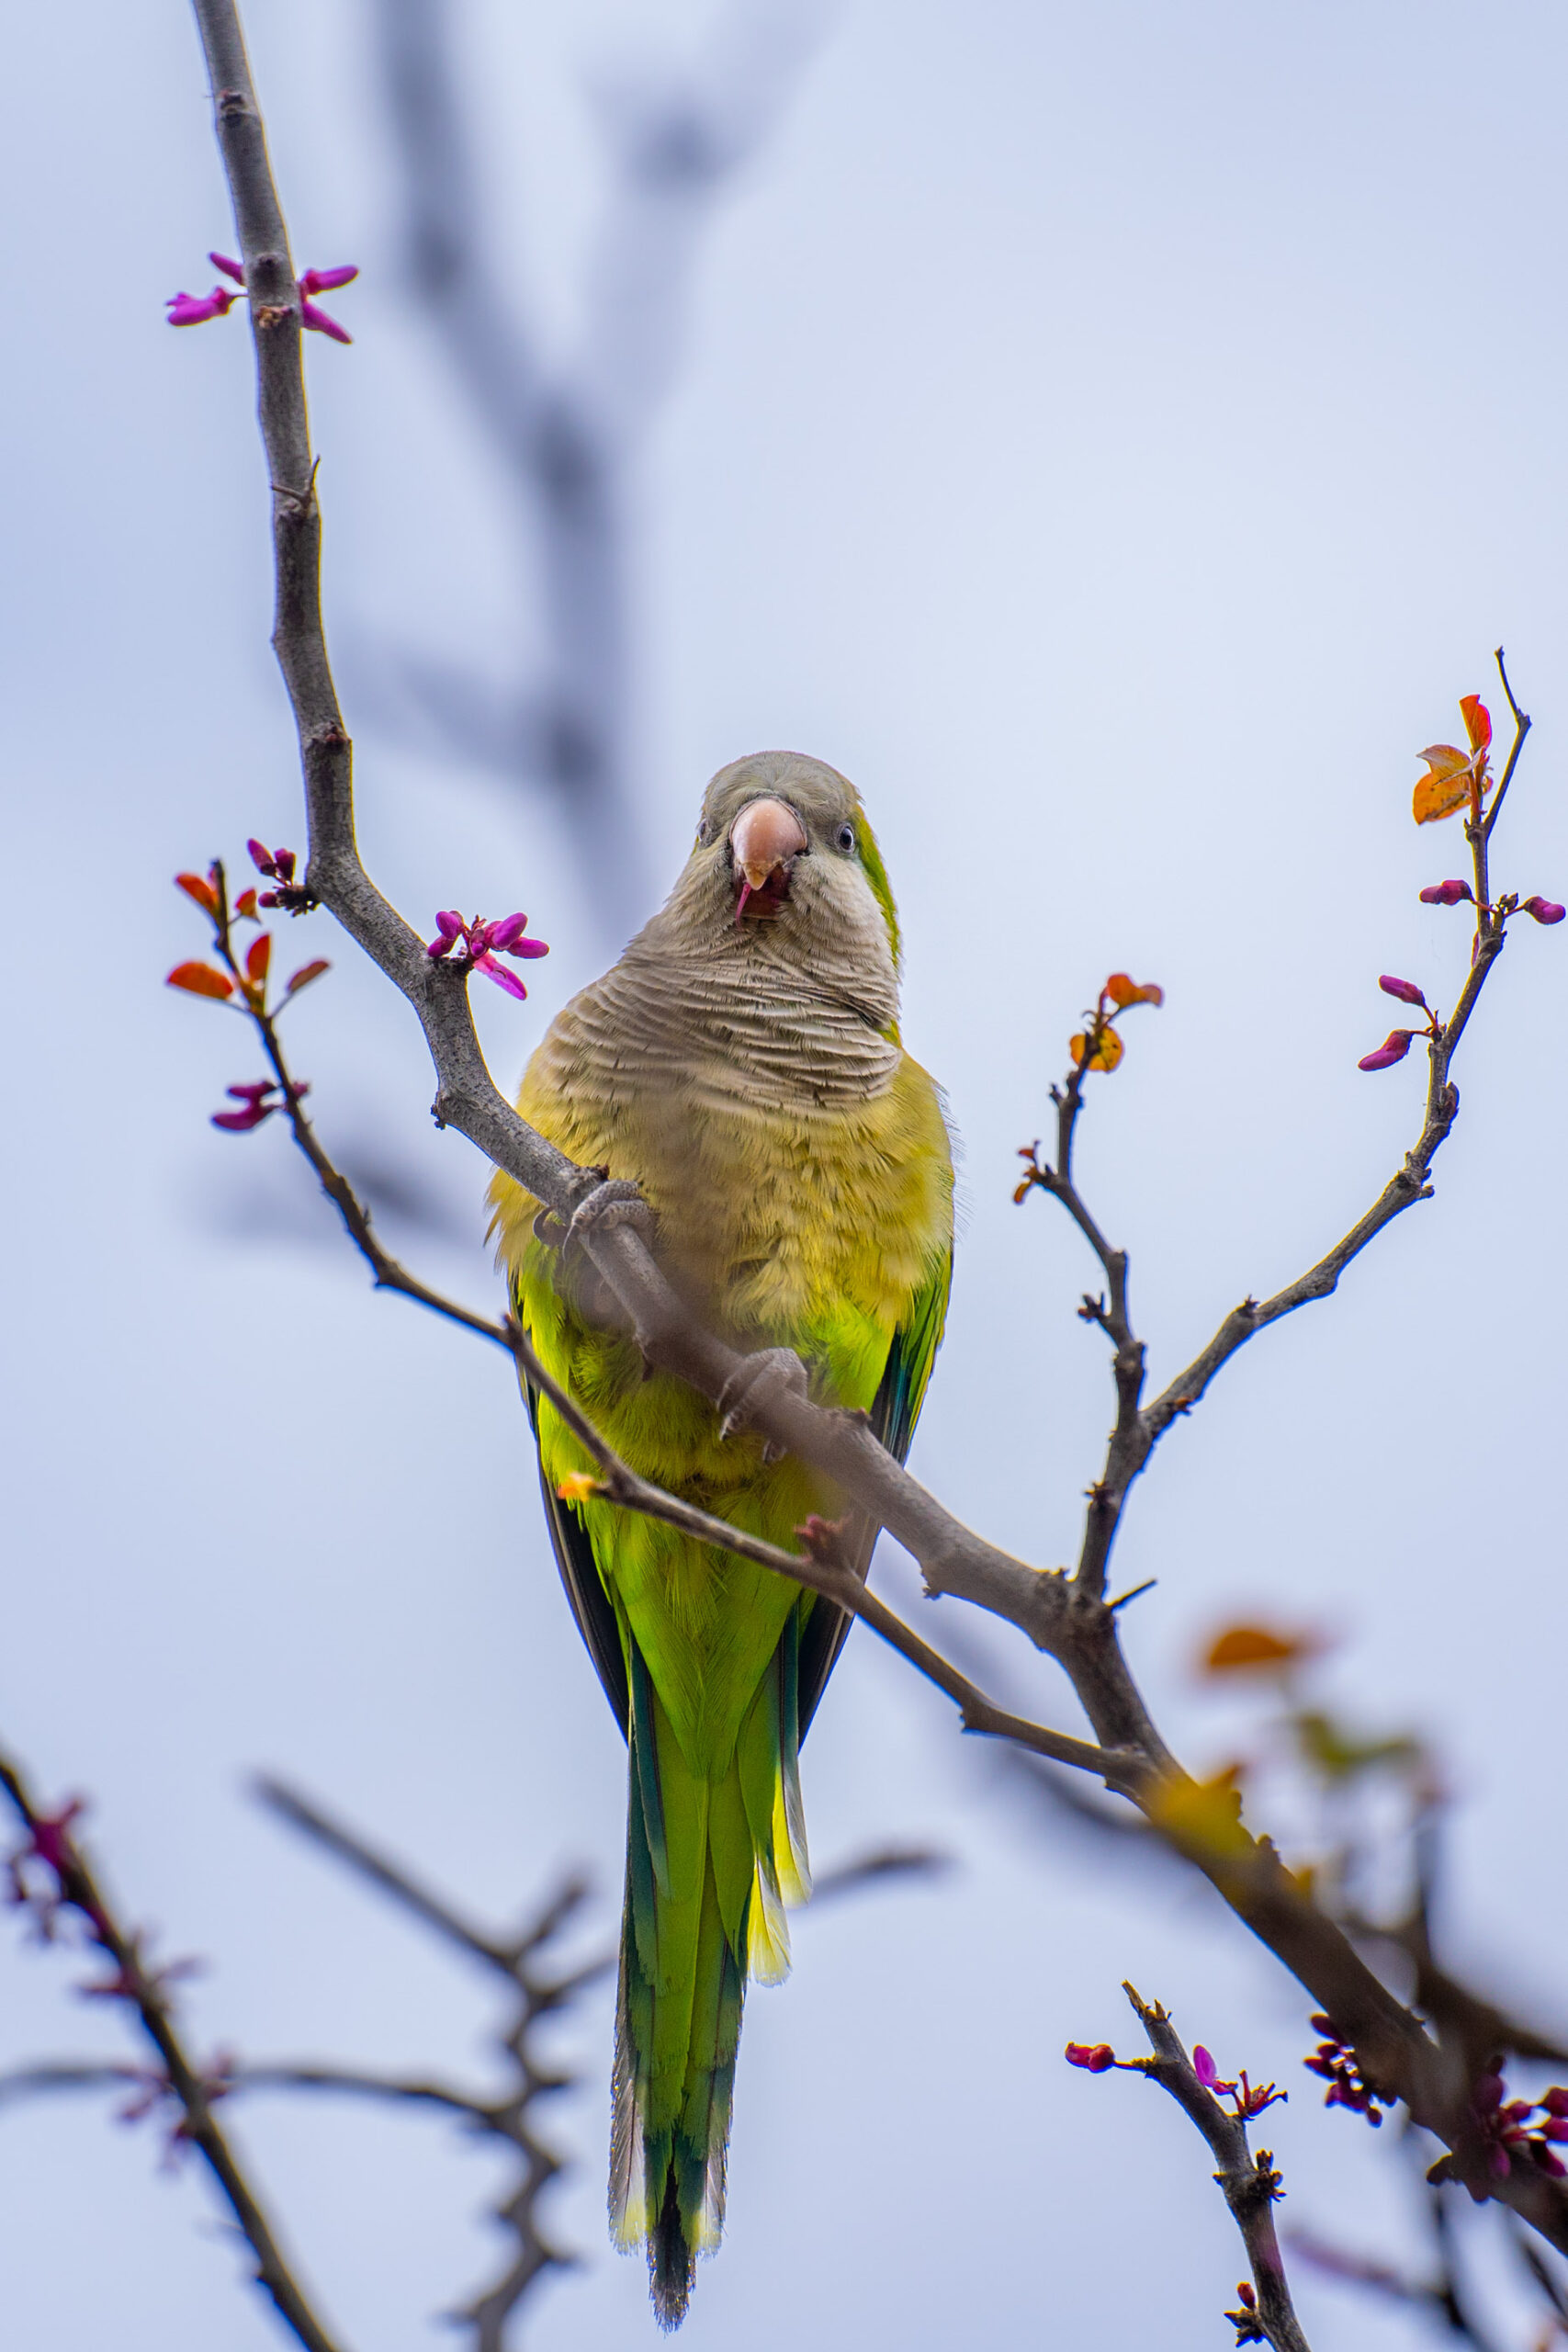 A parakeet perches on a tree branch.